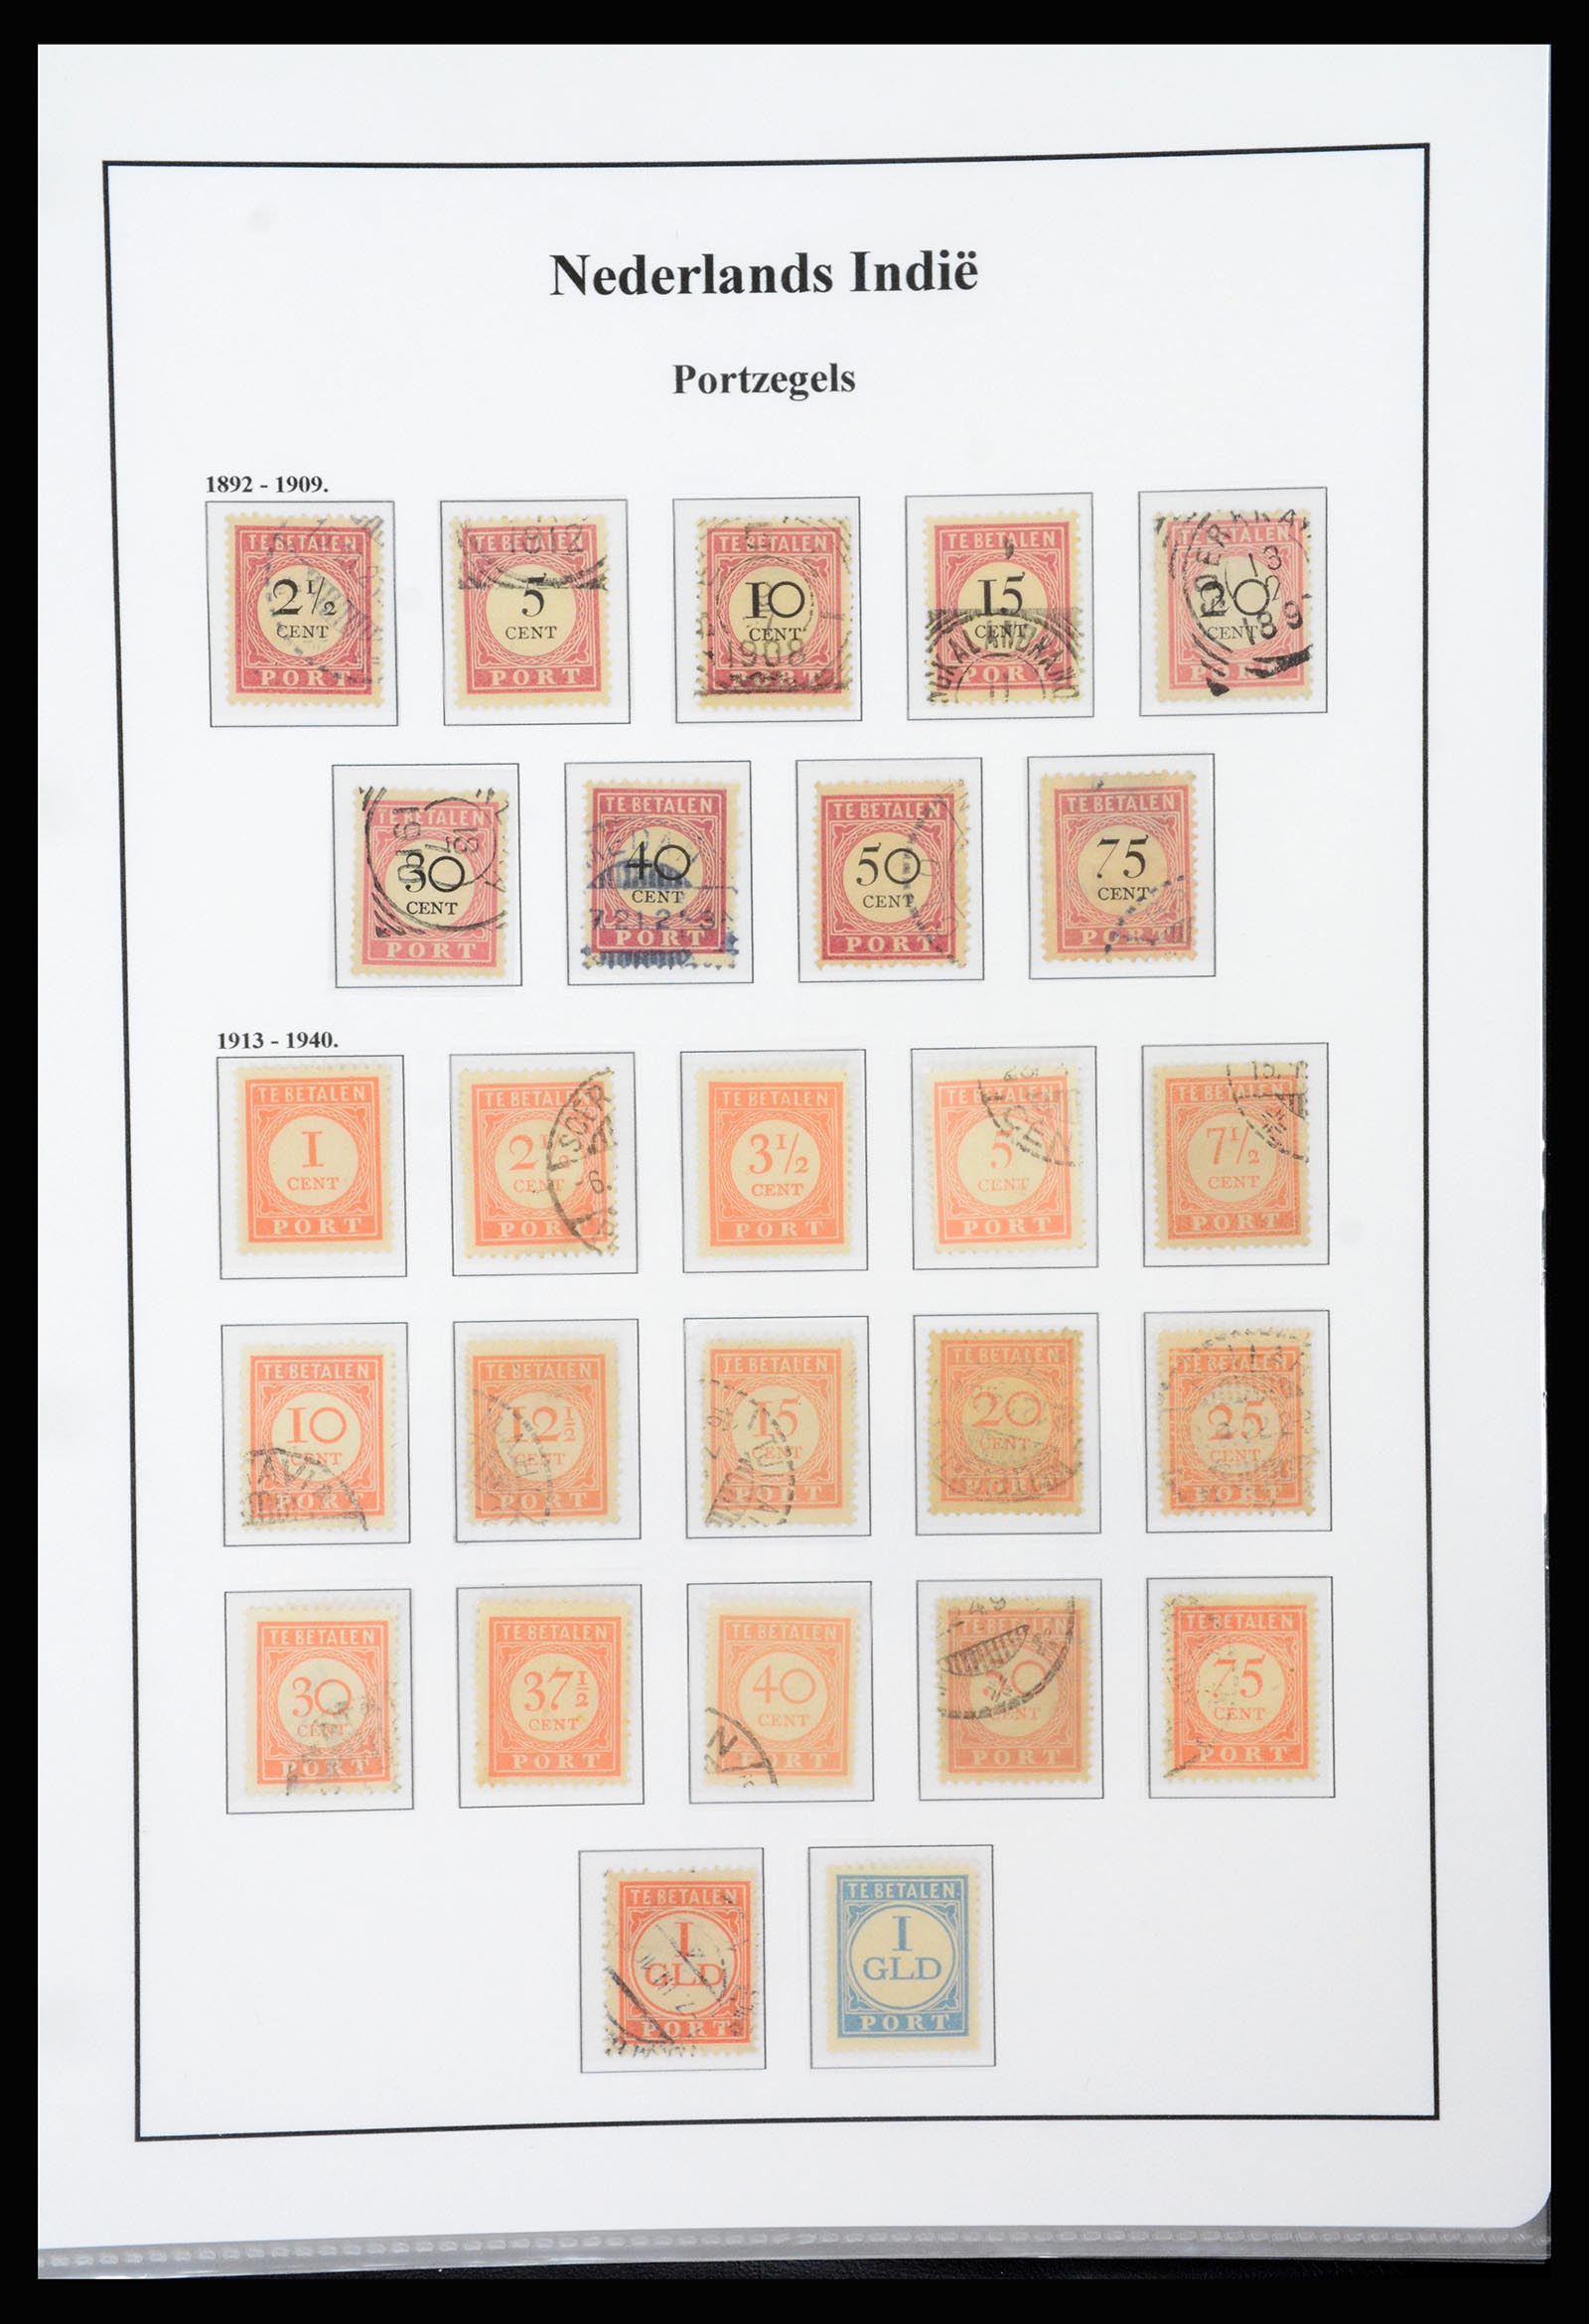 37247 031 - Stamp collection 37247 Dutch east Indies 1864-1949.